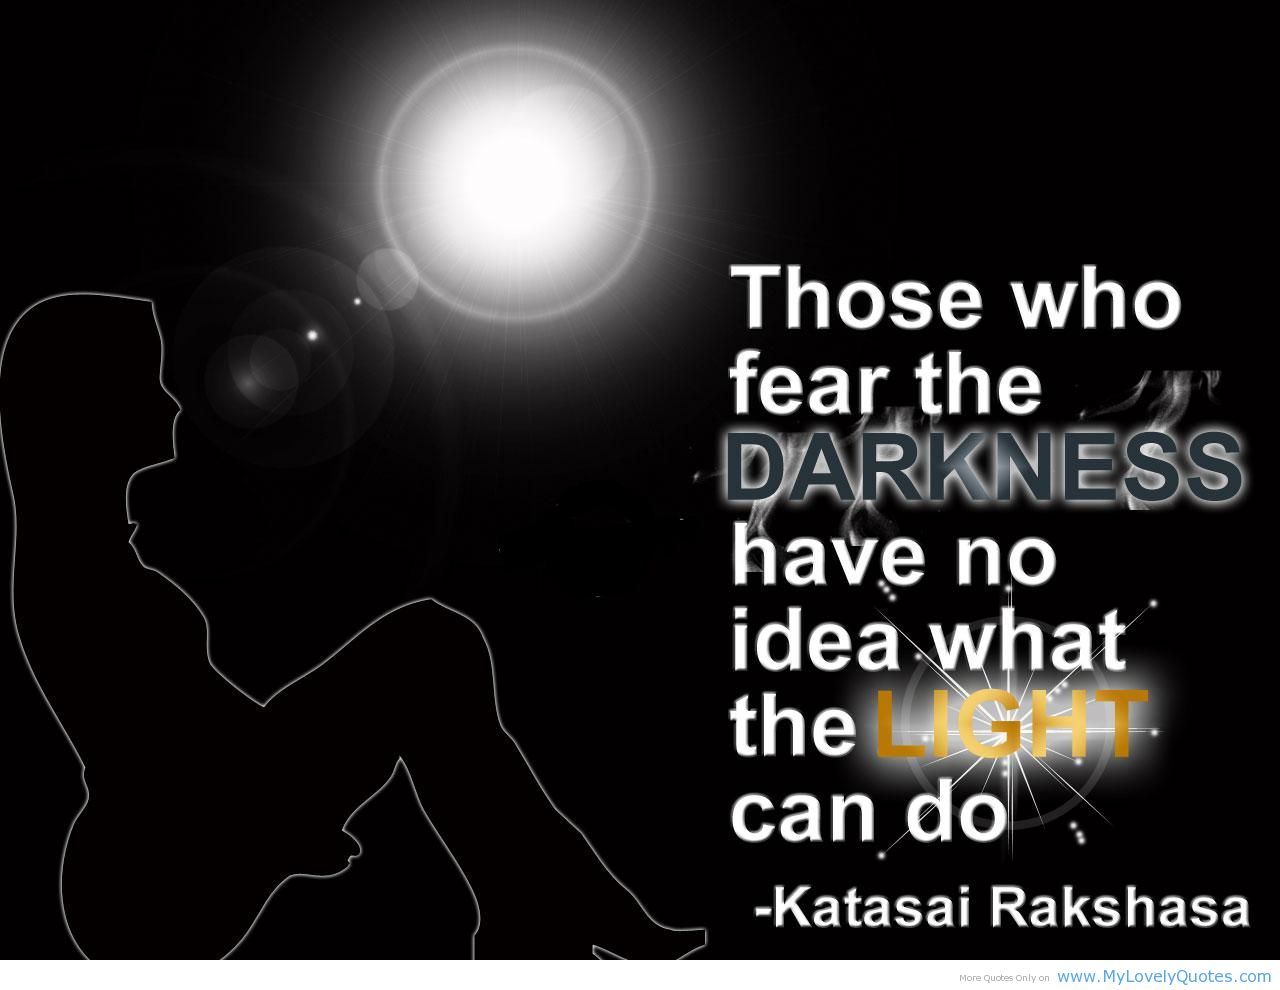 Those who fear the darkness have no idea what the light can do. Katasai Rakshasa